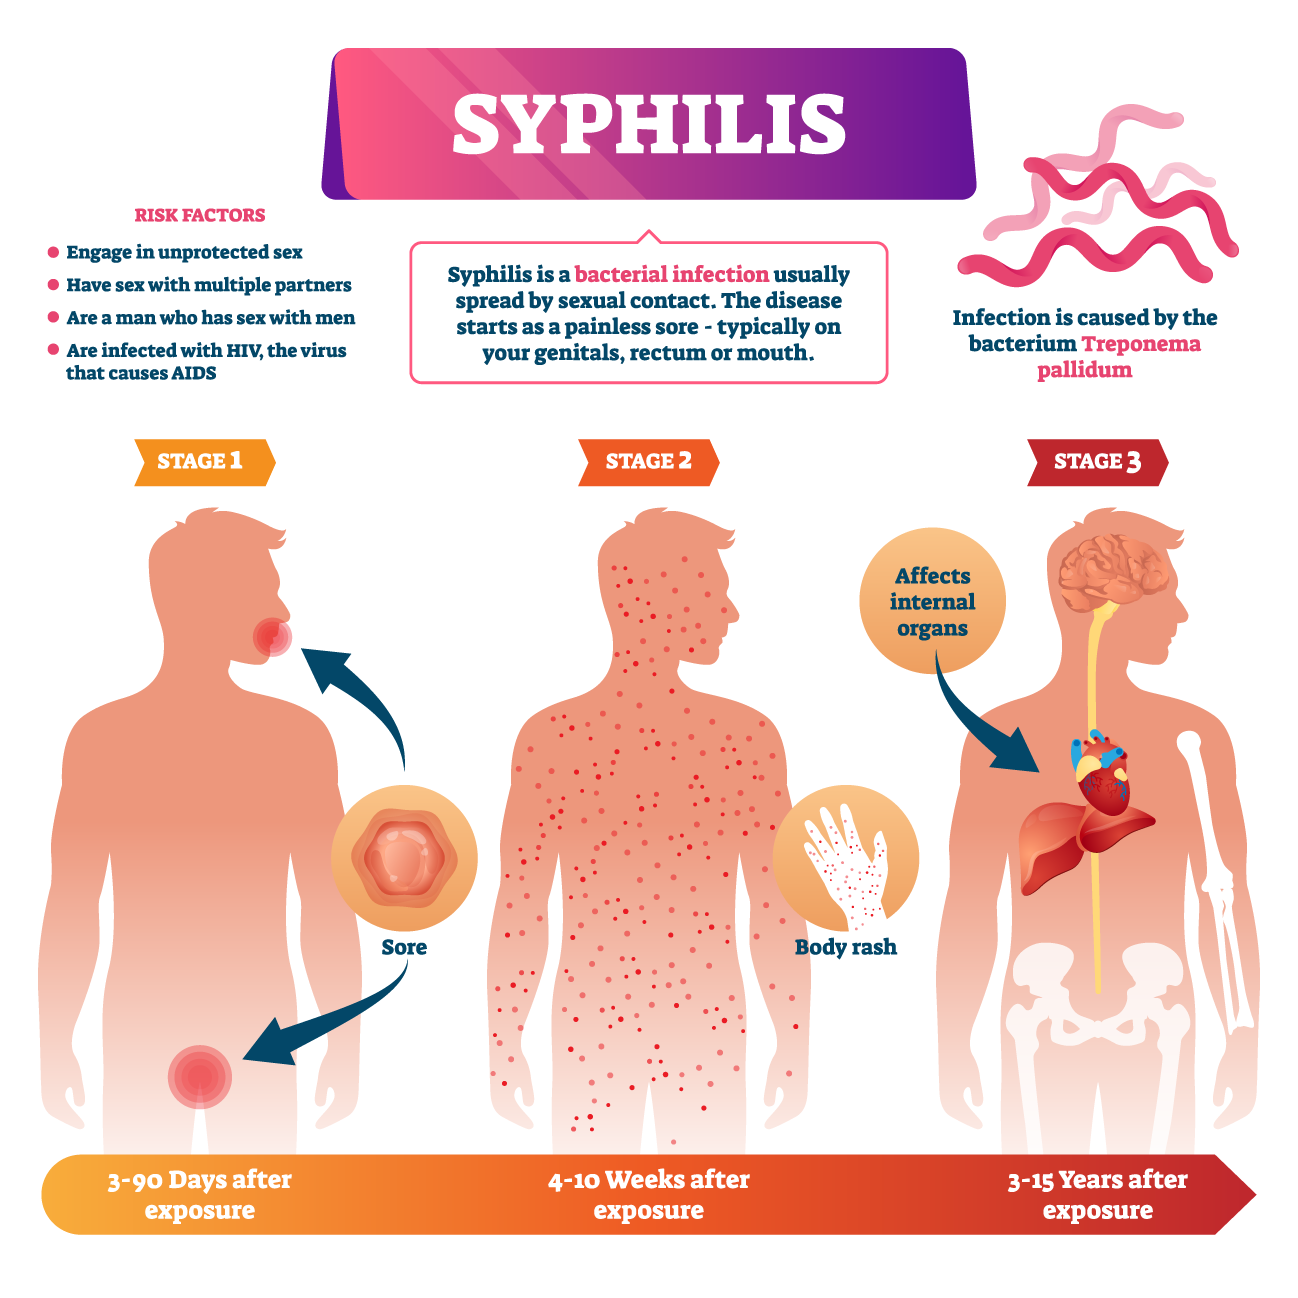 The Stages of Syphilis